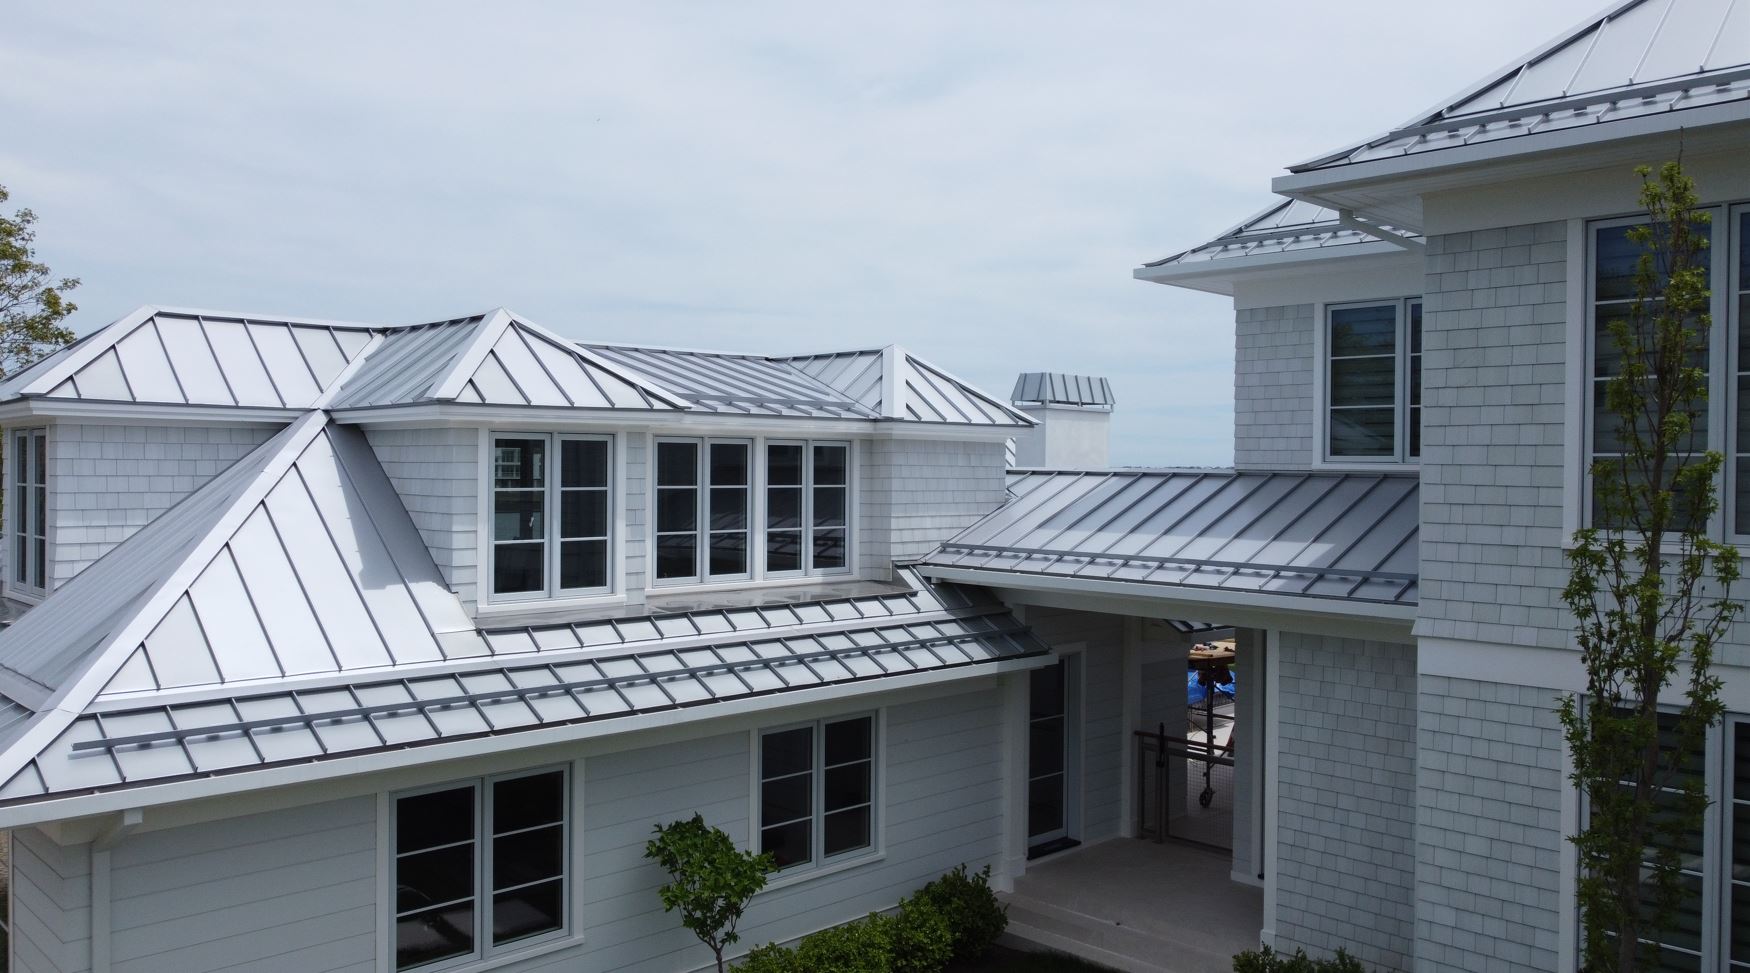 A comprehensive roofing solution, the new gutter program (shown here) features a variety of coils, gutter profiles and accessories.